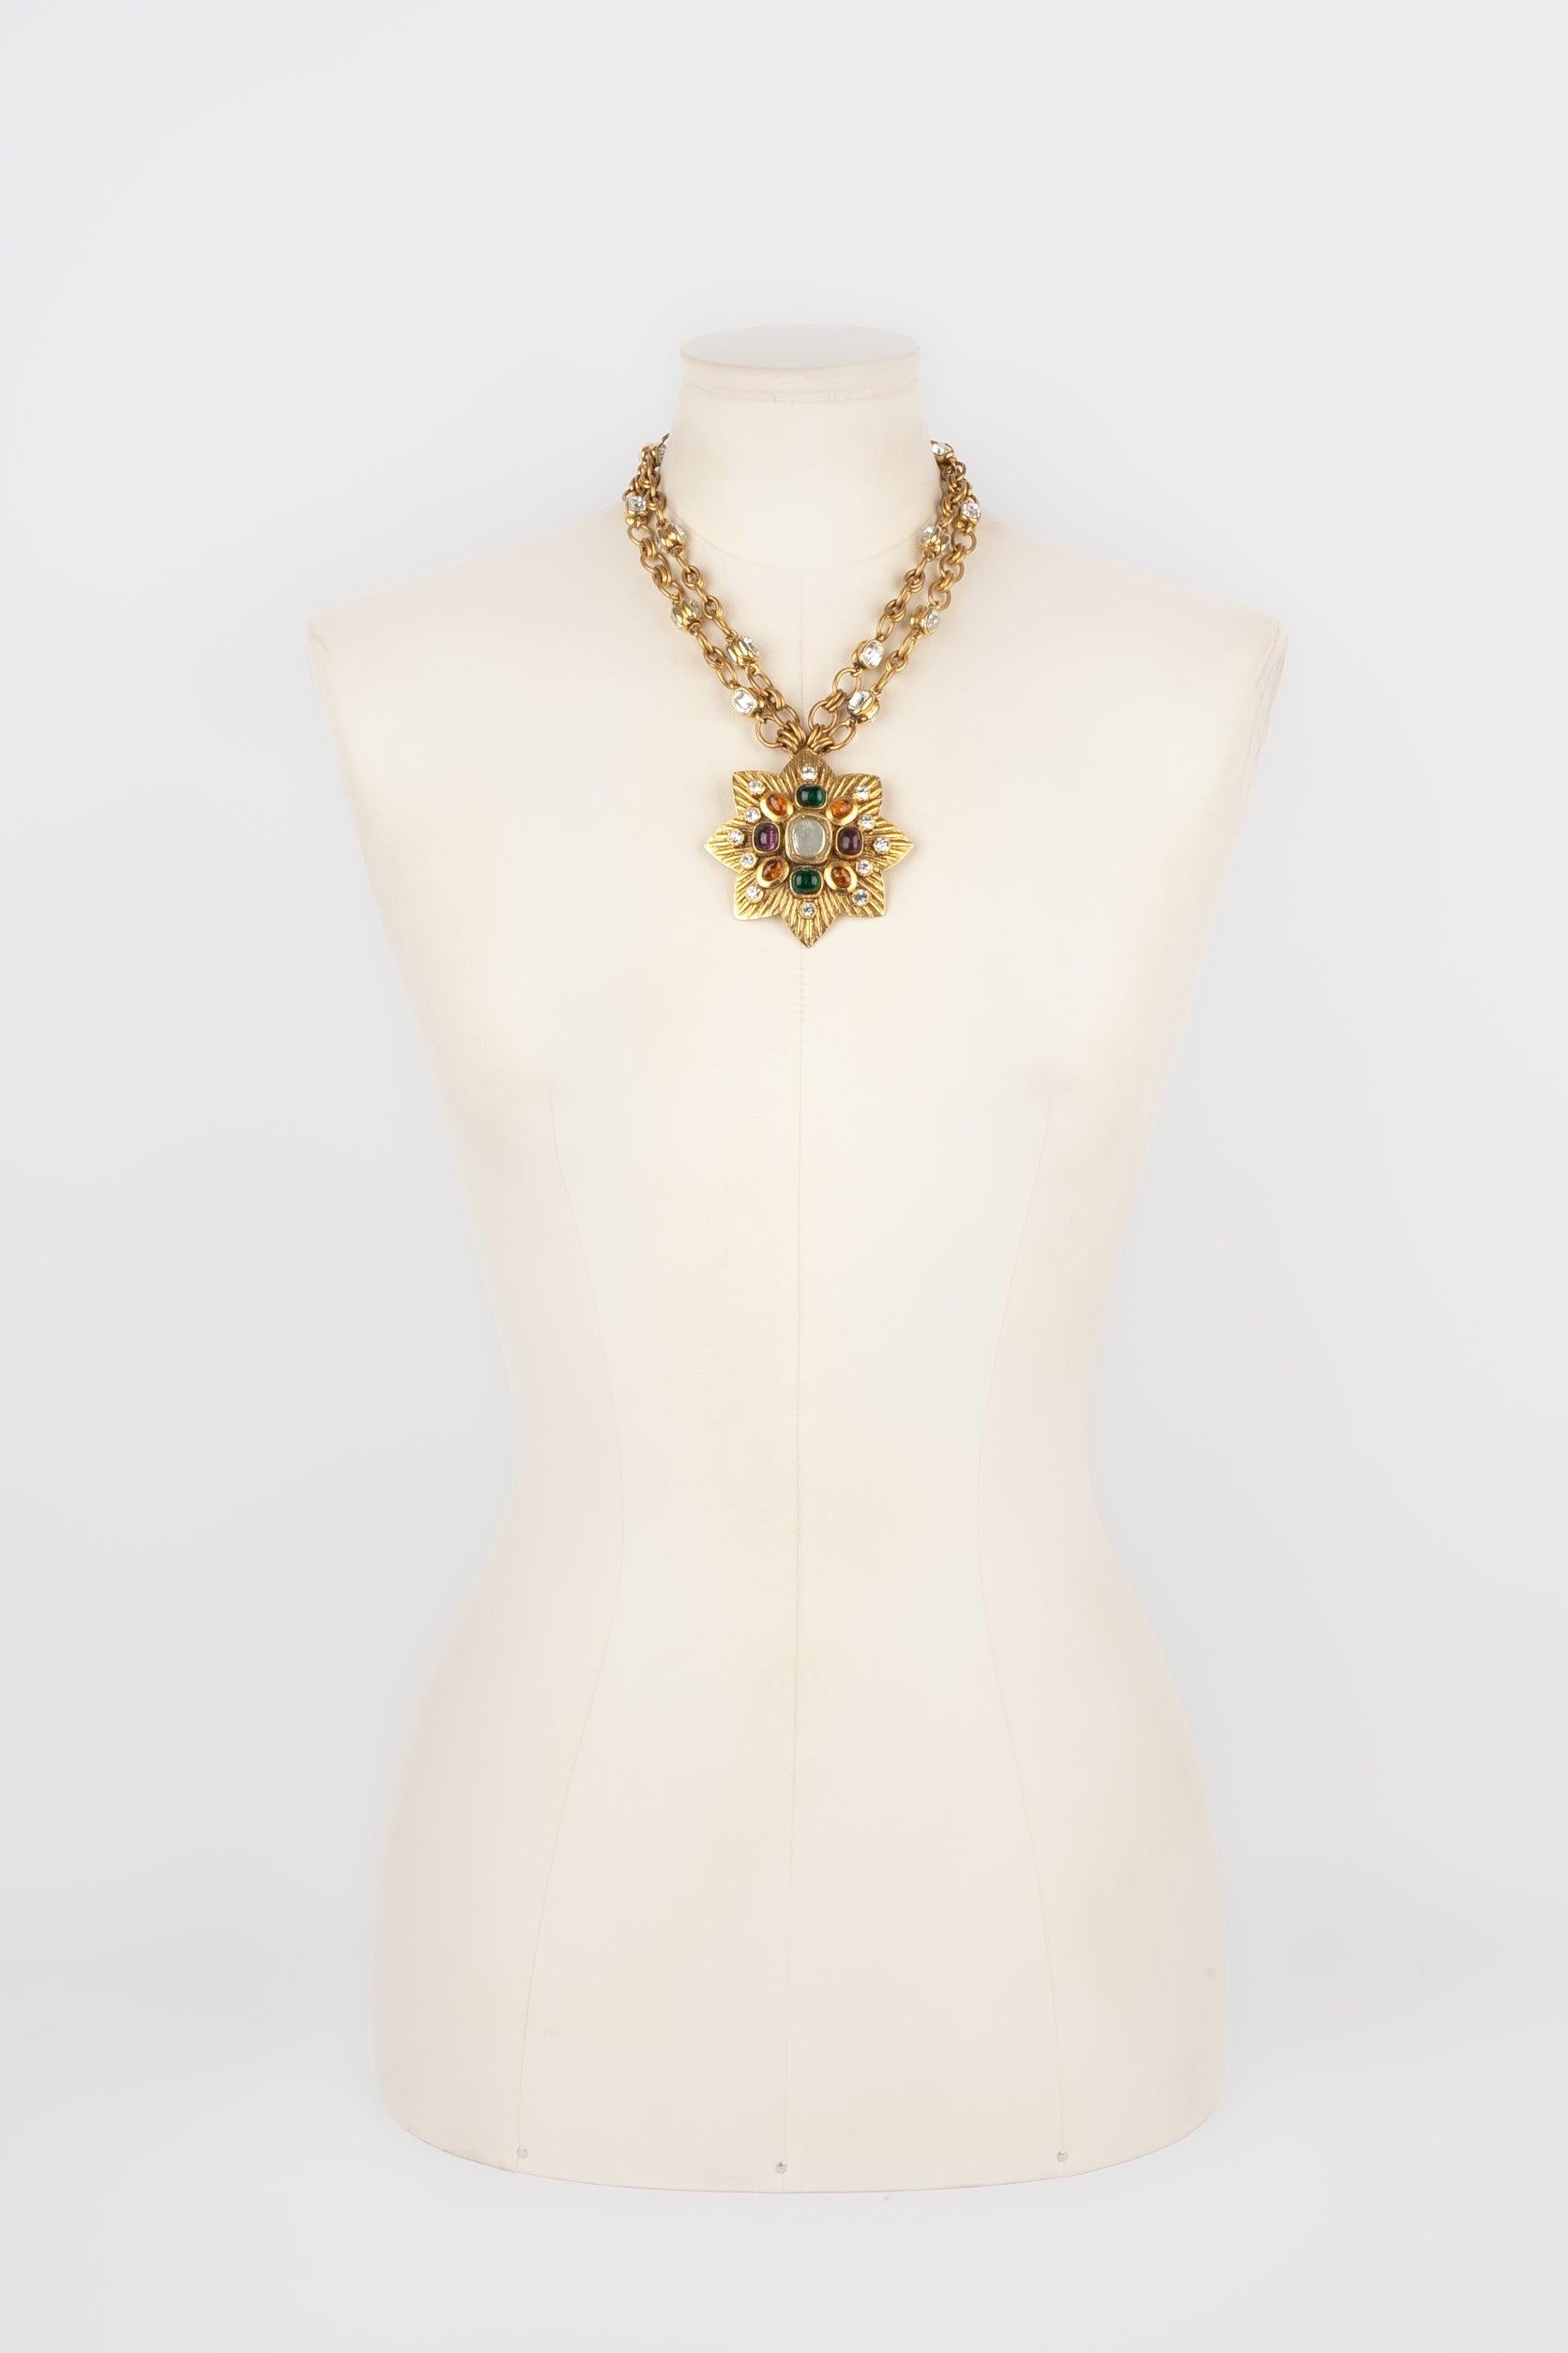 Chanel Golden Metal Two-row Necklace with Rhinestones and a Golden Metal Pendant In Excellent Condition For Sale In SAINT-OUEN-SUR-SEINE, FR